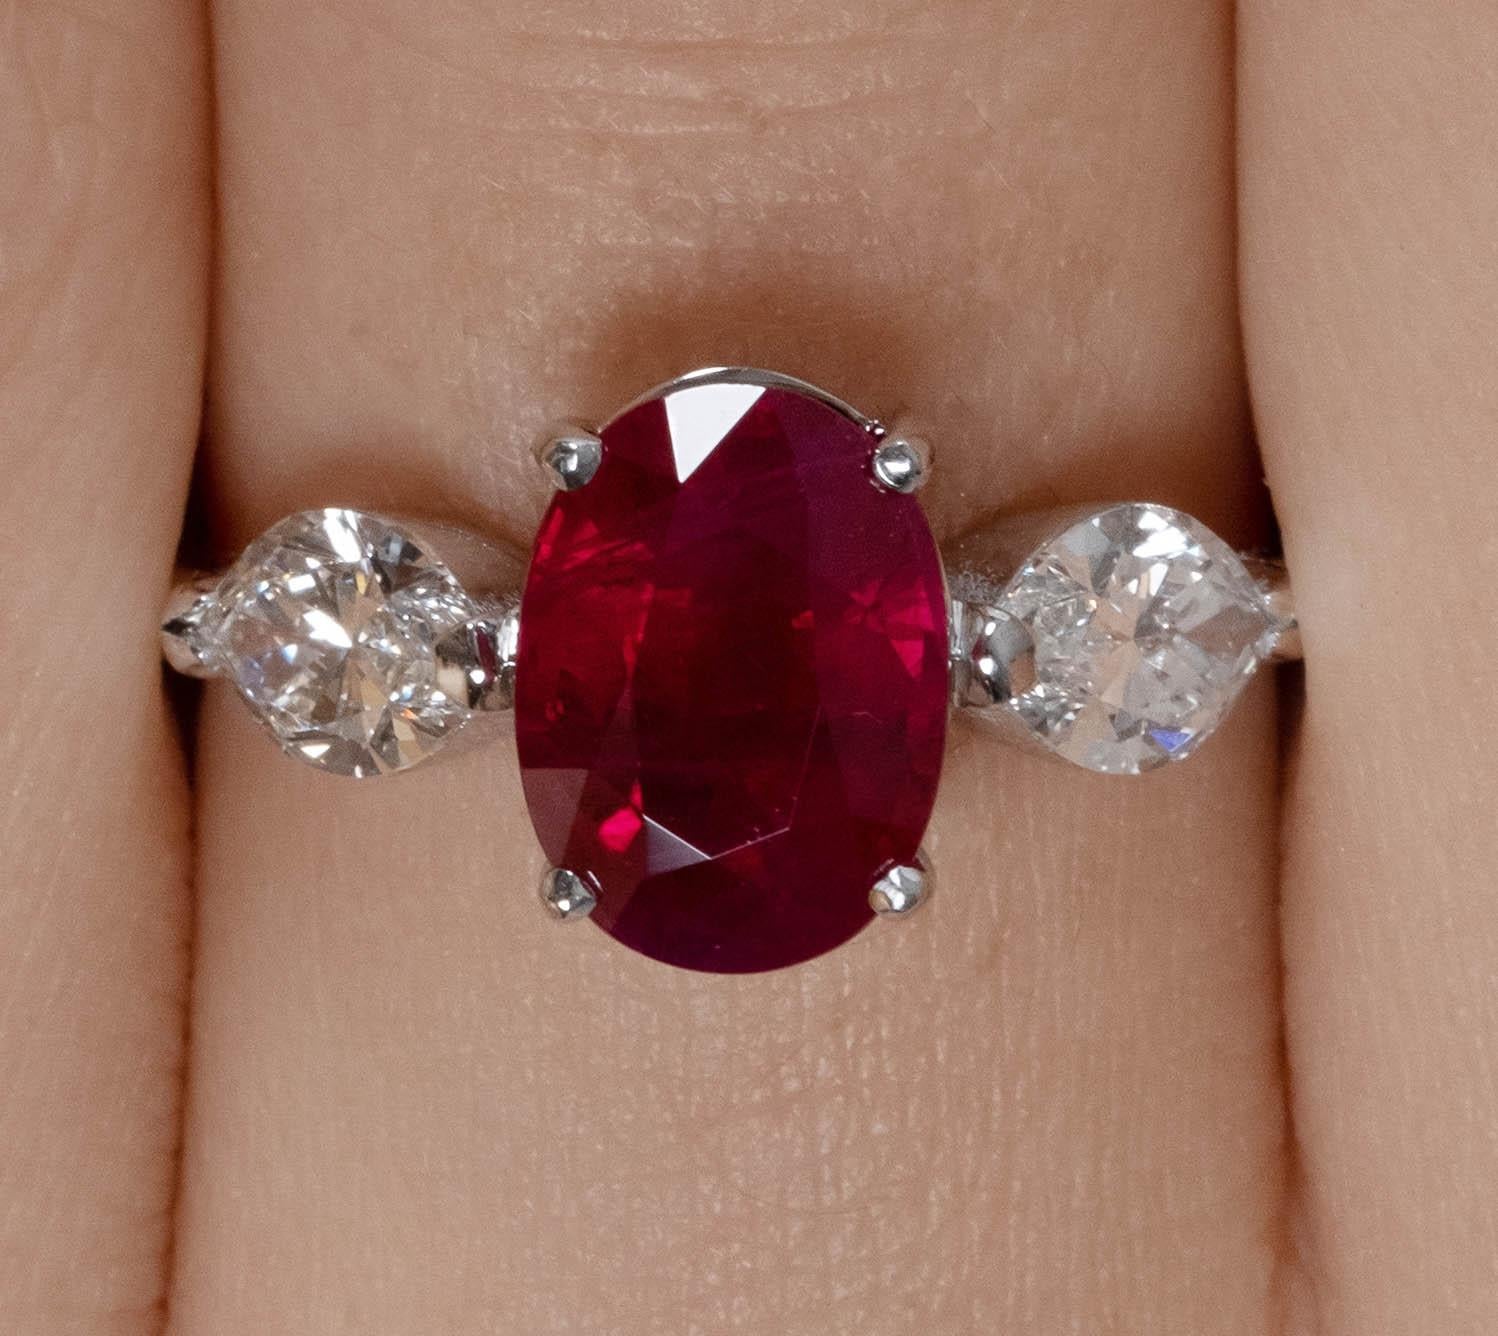 A Breathtaking Estate HANDMADE 18k White Gold (stamped) Three-Stone Engagement ring contains GIA Certified 3.02ct Oval shaped Natural Red Ruby; with measurements of 9.23x6.78x5.27mm. BURMA origin. GIA report # 5211807626. Also available with GRS